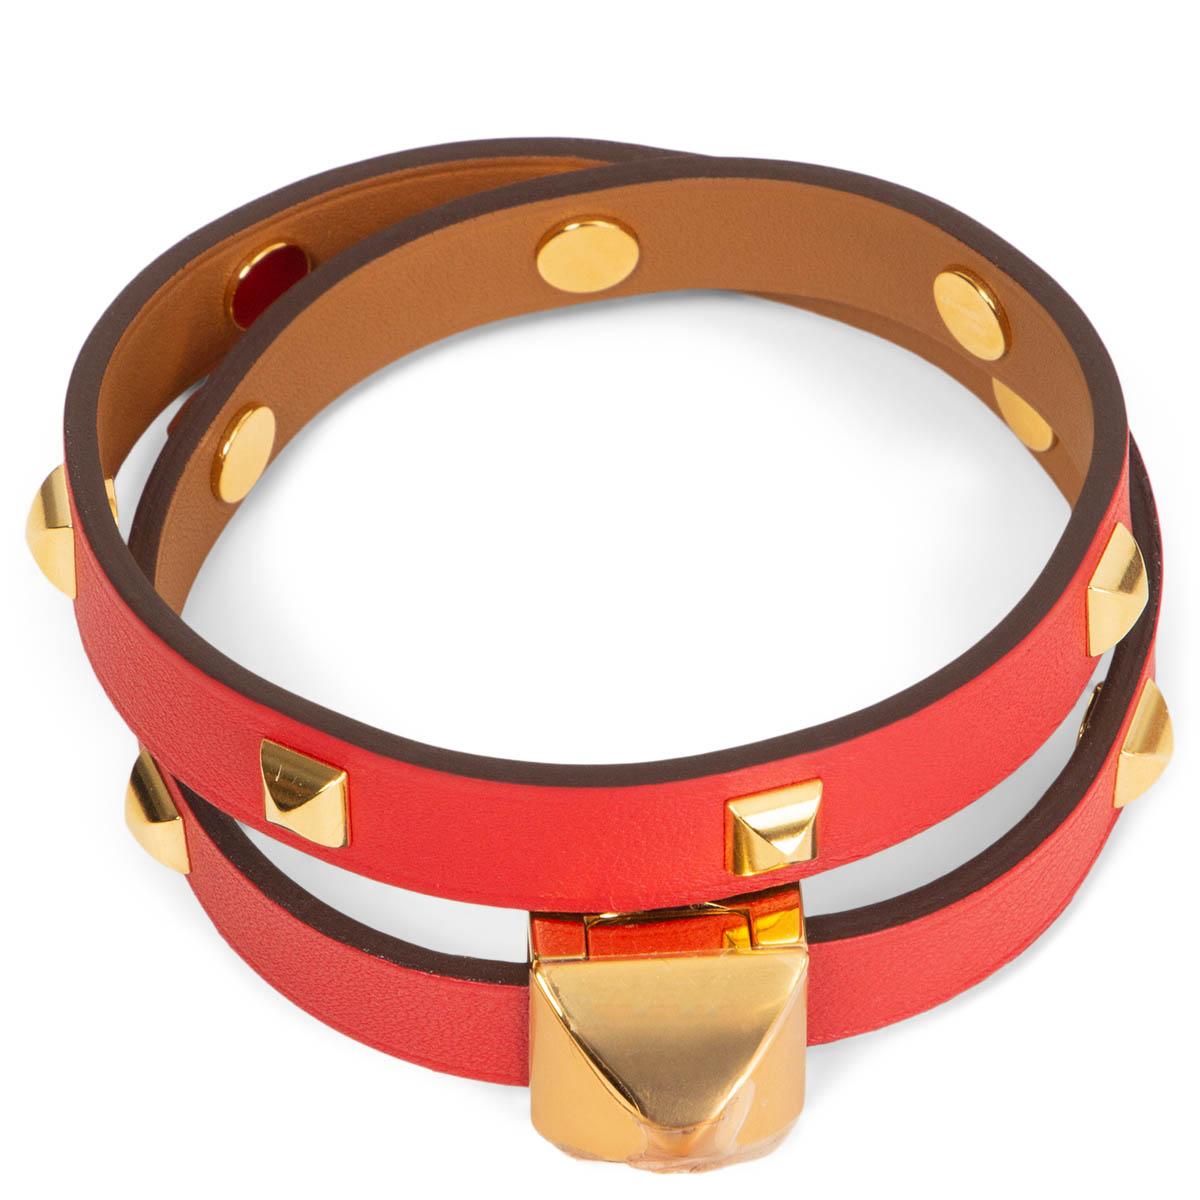 100% authentic Hermès Infini Clouté Double Tour bracelet in Rouge de Coeur in Veau Swift leather with gold-tone hardware. Brand new.  No Box.

Measurements
Tag Size	T3
Width	0.9cm (0.4in)
Length	36.6cm (14.3in)
Hardware	Gold-Tone

All our listings